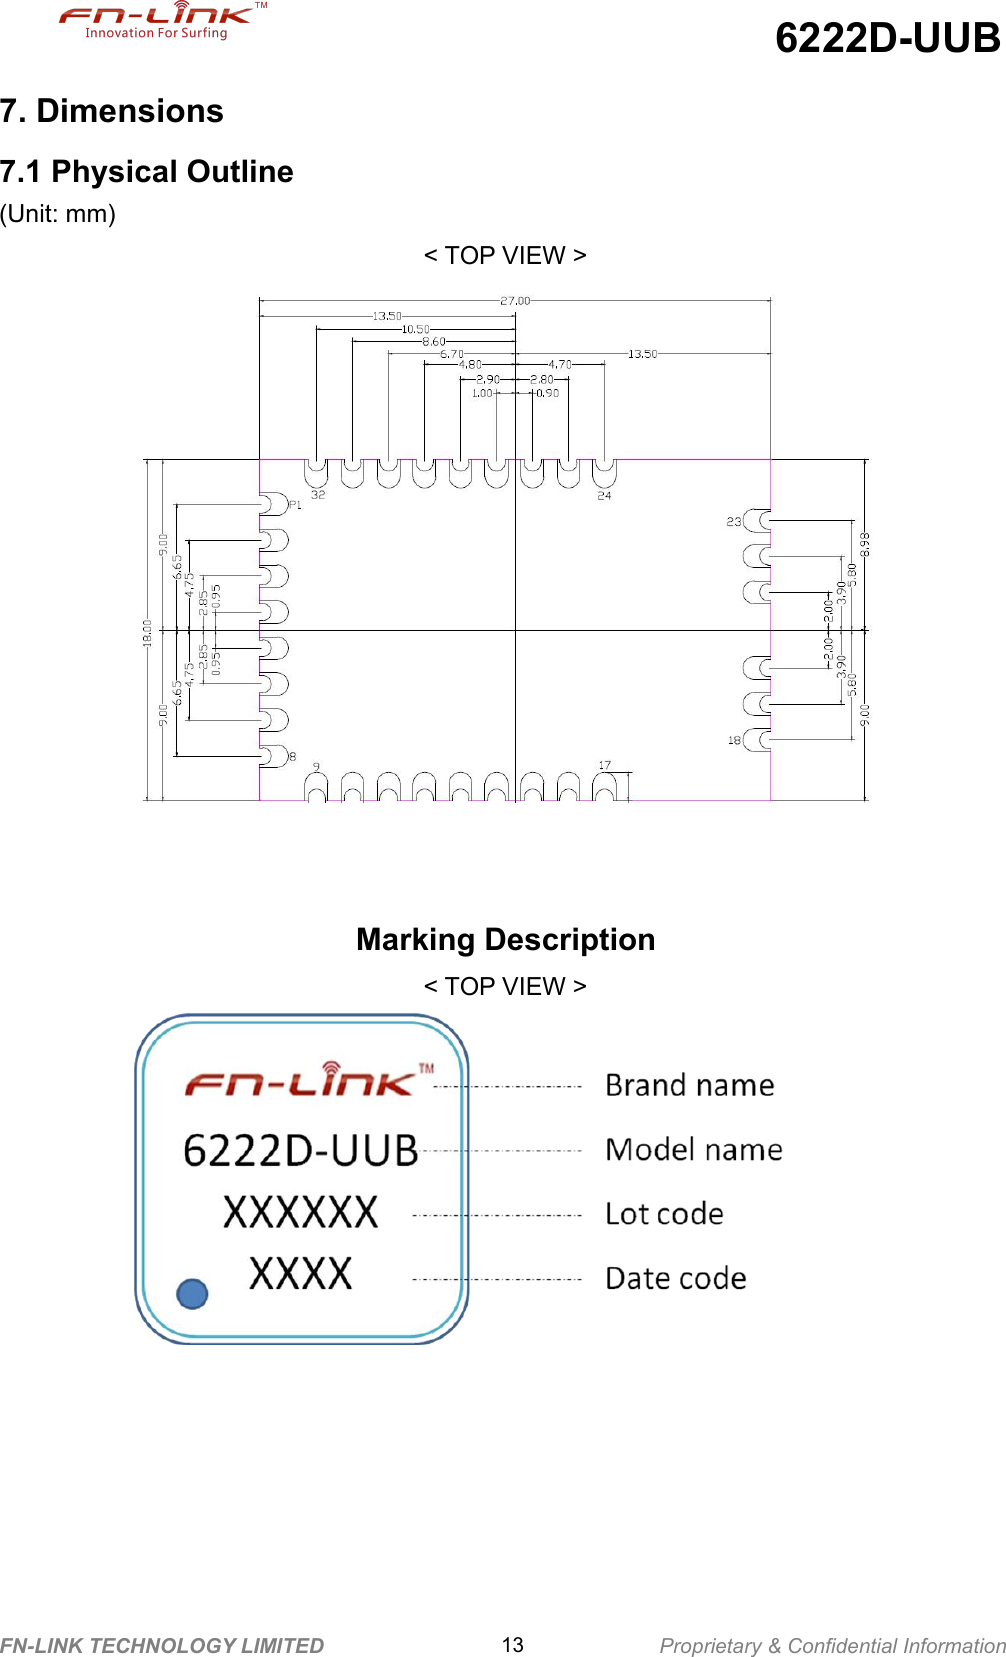 6222D-UUBFN-LINK TECHNOLOGY LIMITED 13 Proprietary &amp; Confidential Information7. Dimensions7.1 Physical Outline(Unit: mm)&lt; TOP VIEW &gt;Marking Description&lt; TOP VIEW &gt;